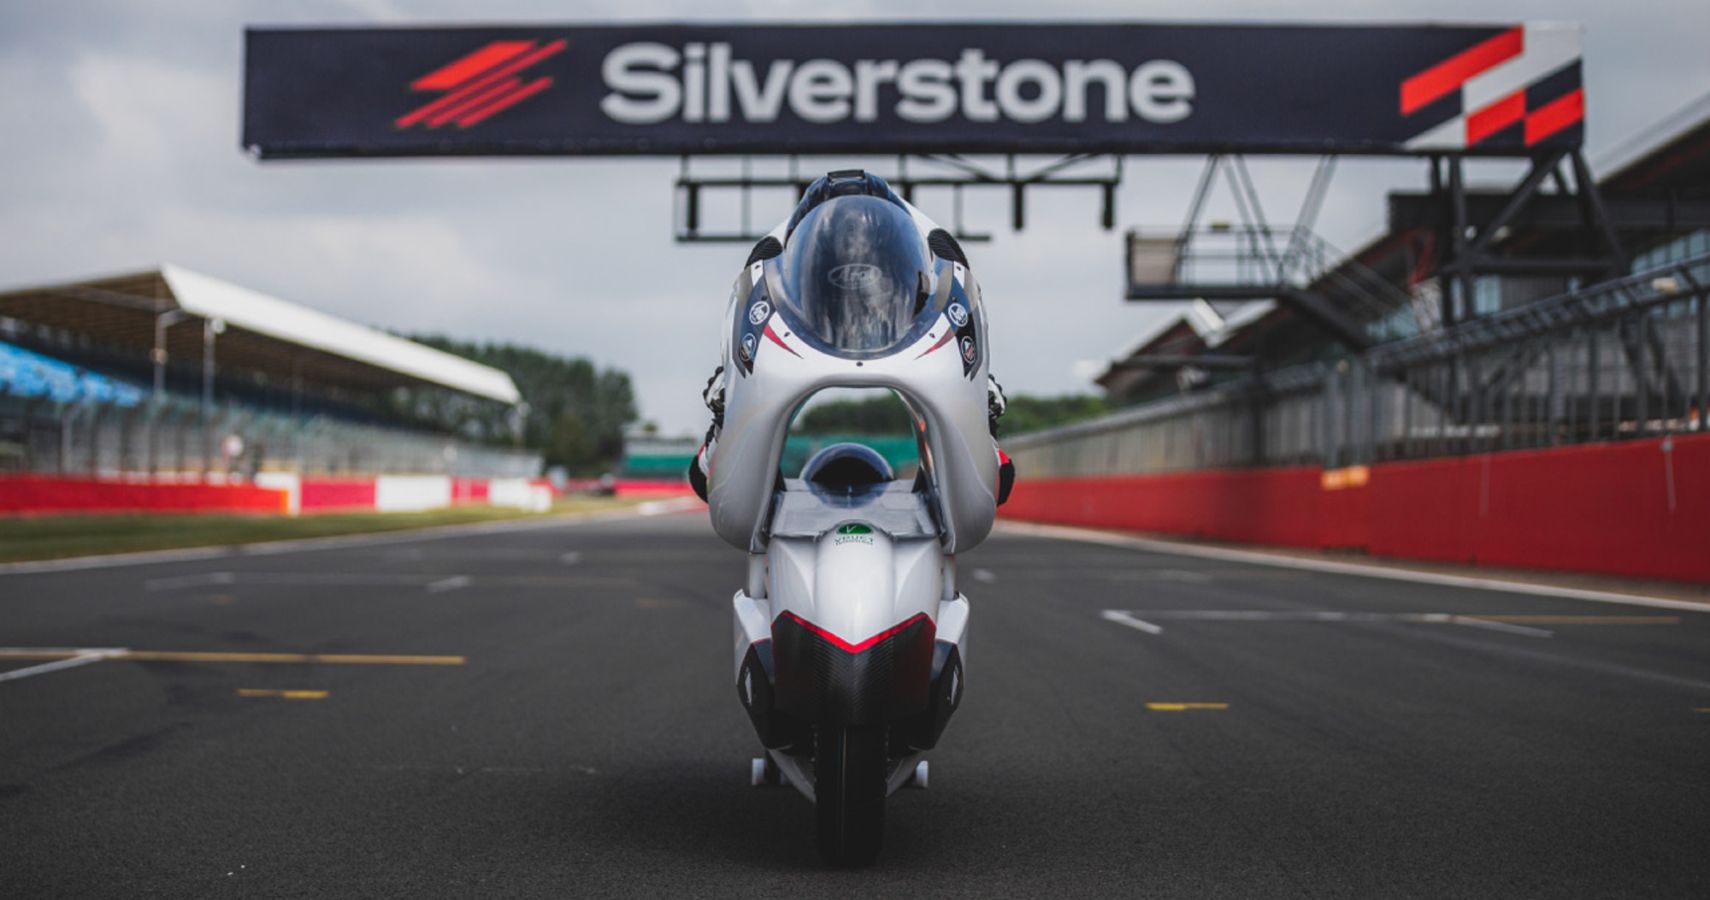 A rider on the White Motorcycle Concepts WMC250EV at Silverstone.